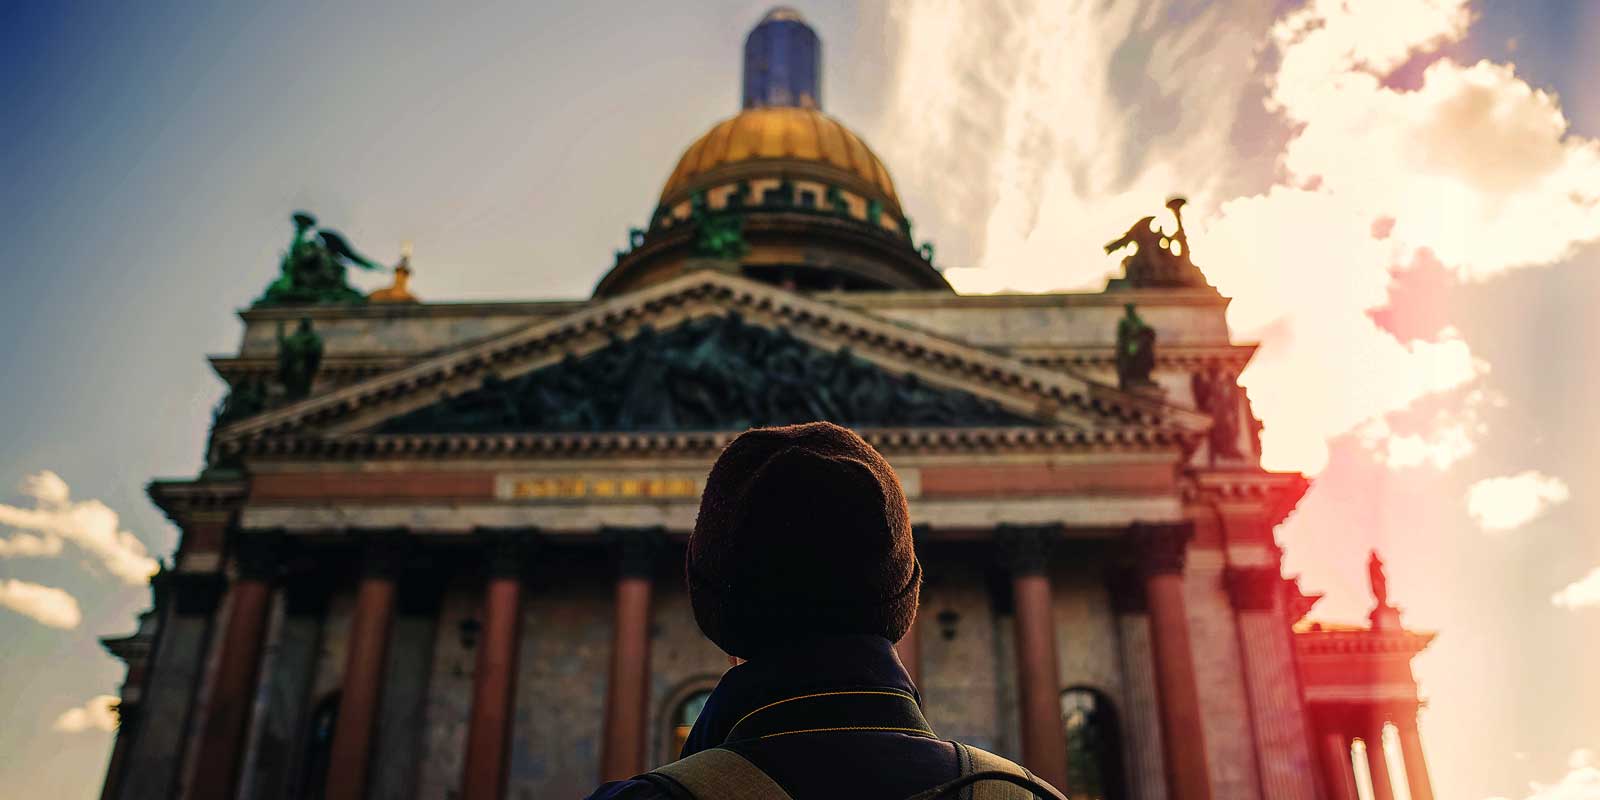 Man looking up at an ornate building in St. Petersburg, Russia.